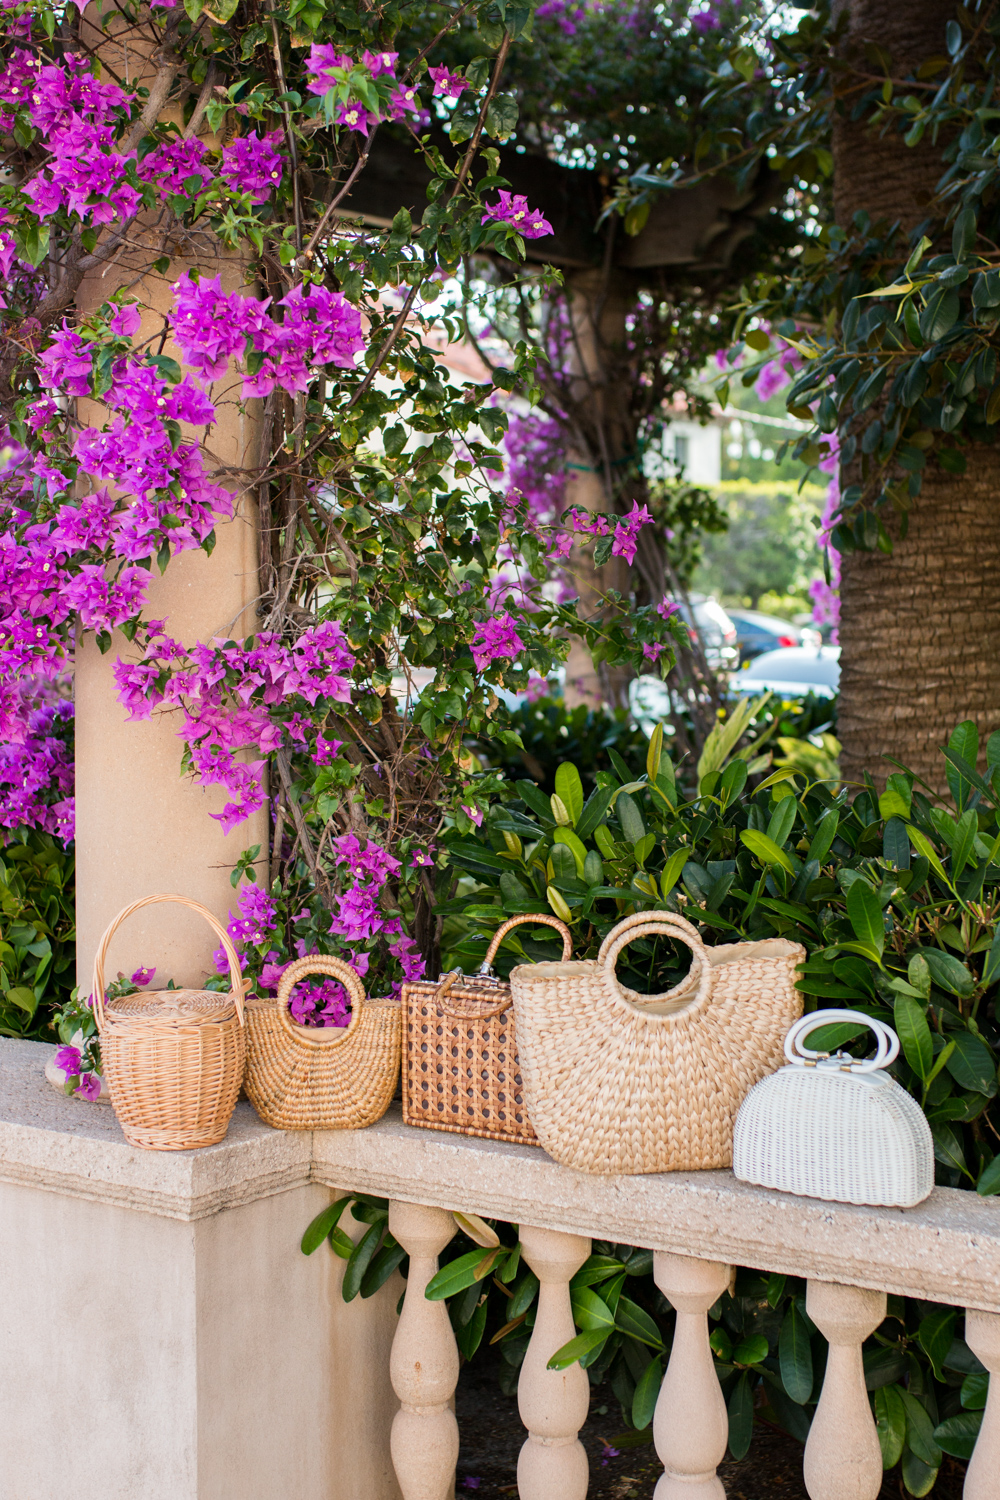 Basket Bags in West Palm Beach, Florida - Sunshine Style